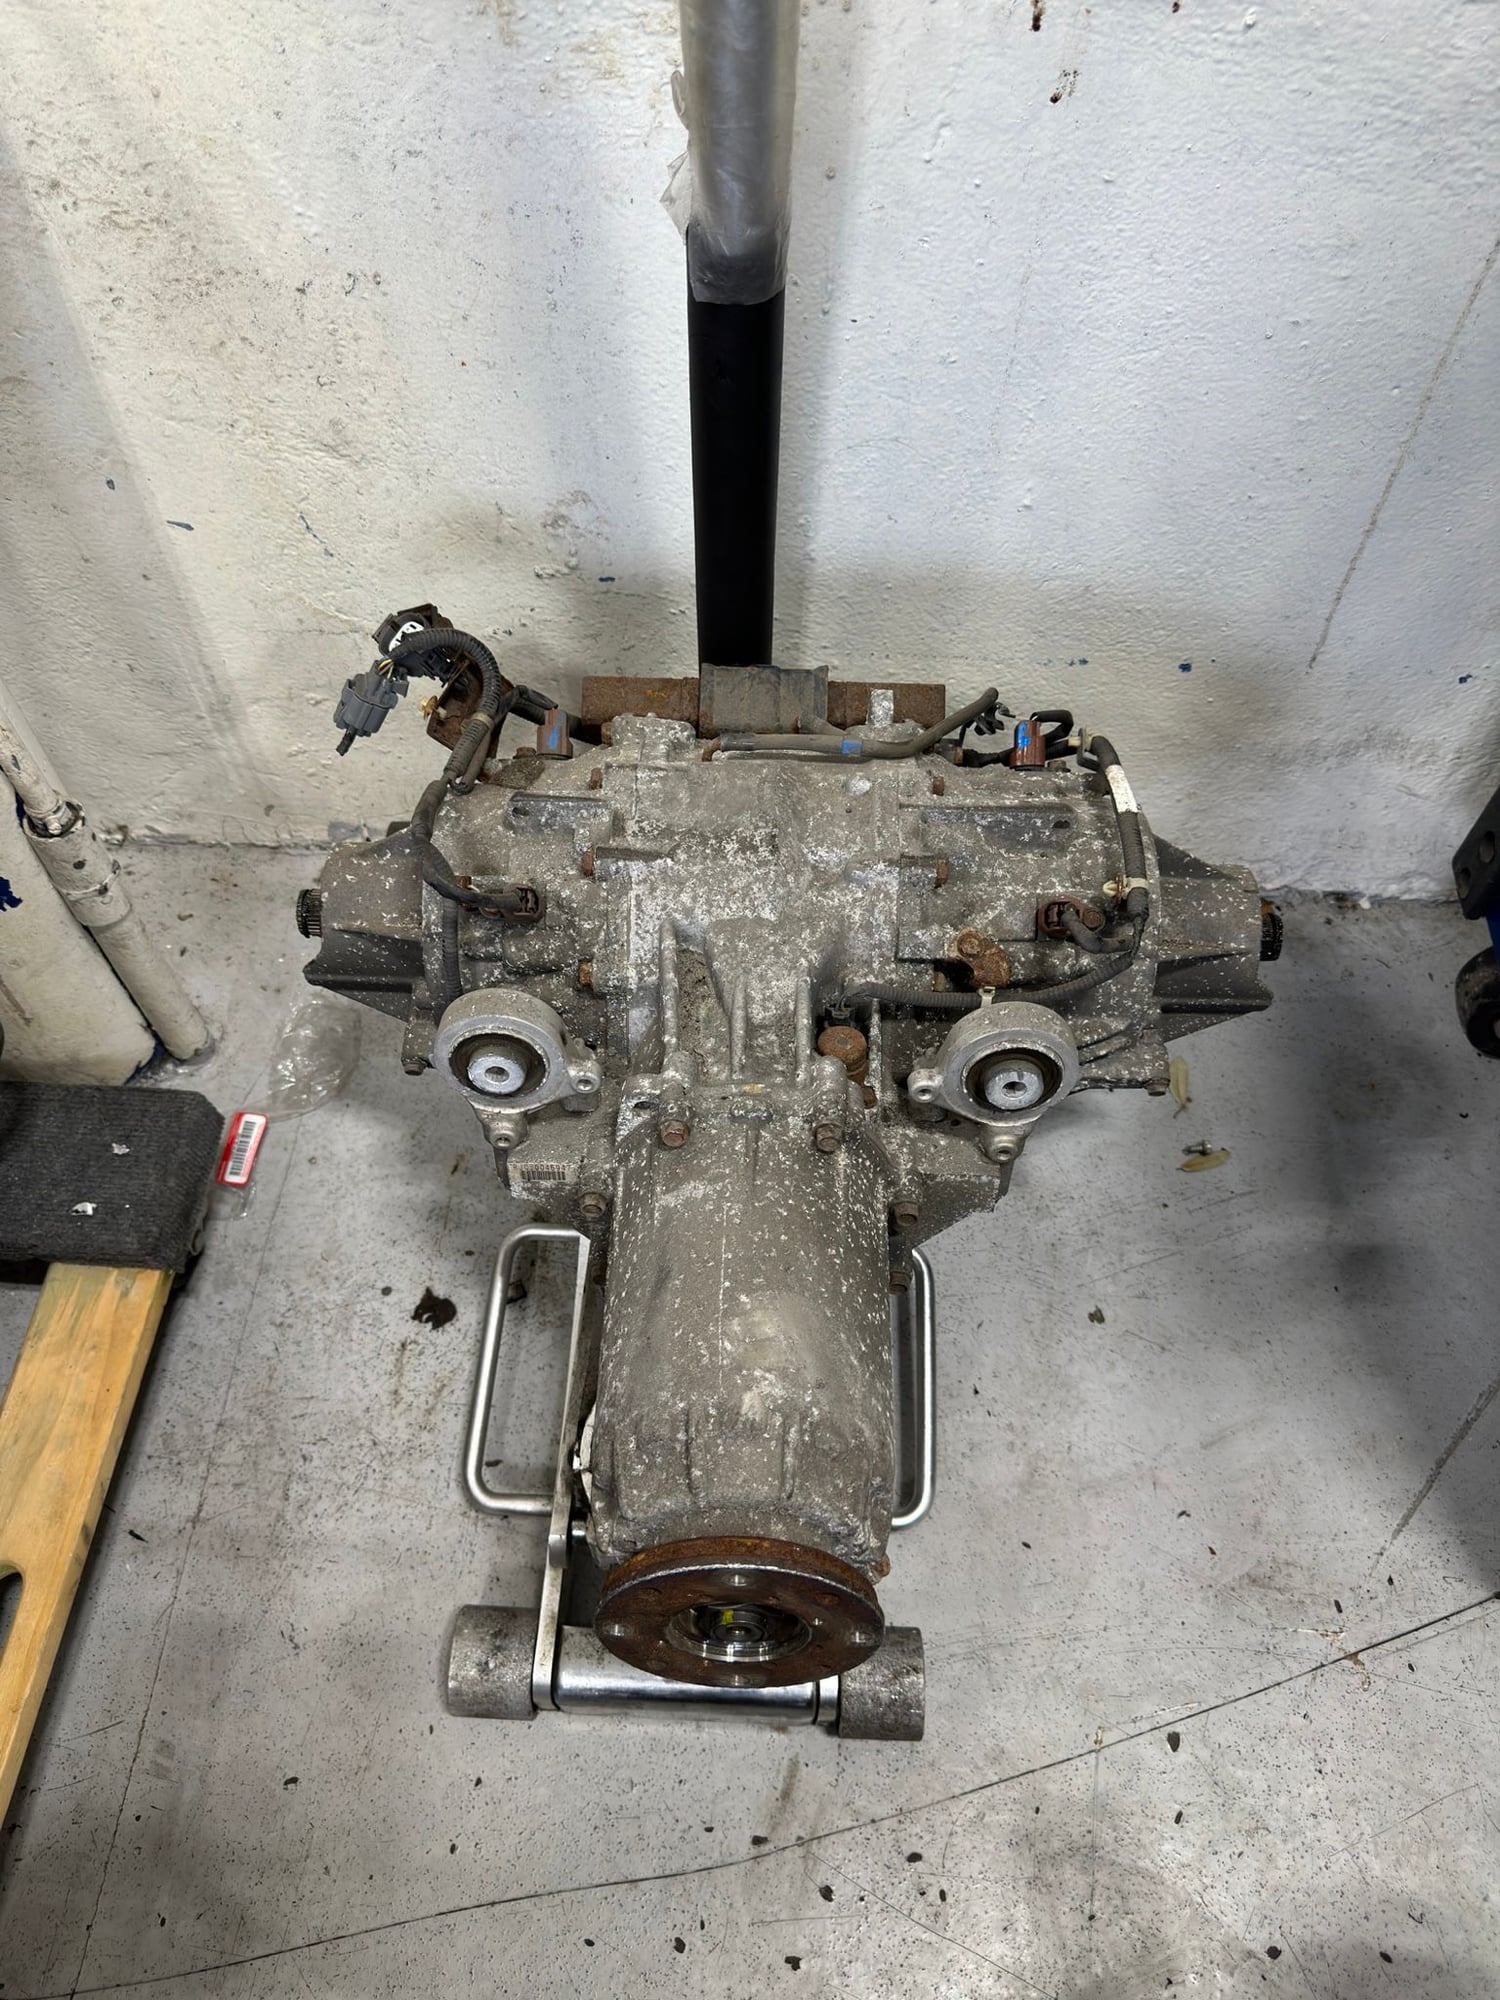 2006 Acura RL - Rear differential complete! - Accessories - $150 - Katy, TX 77494, United States